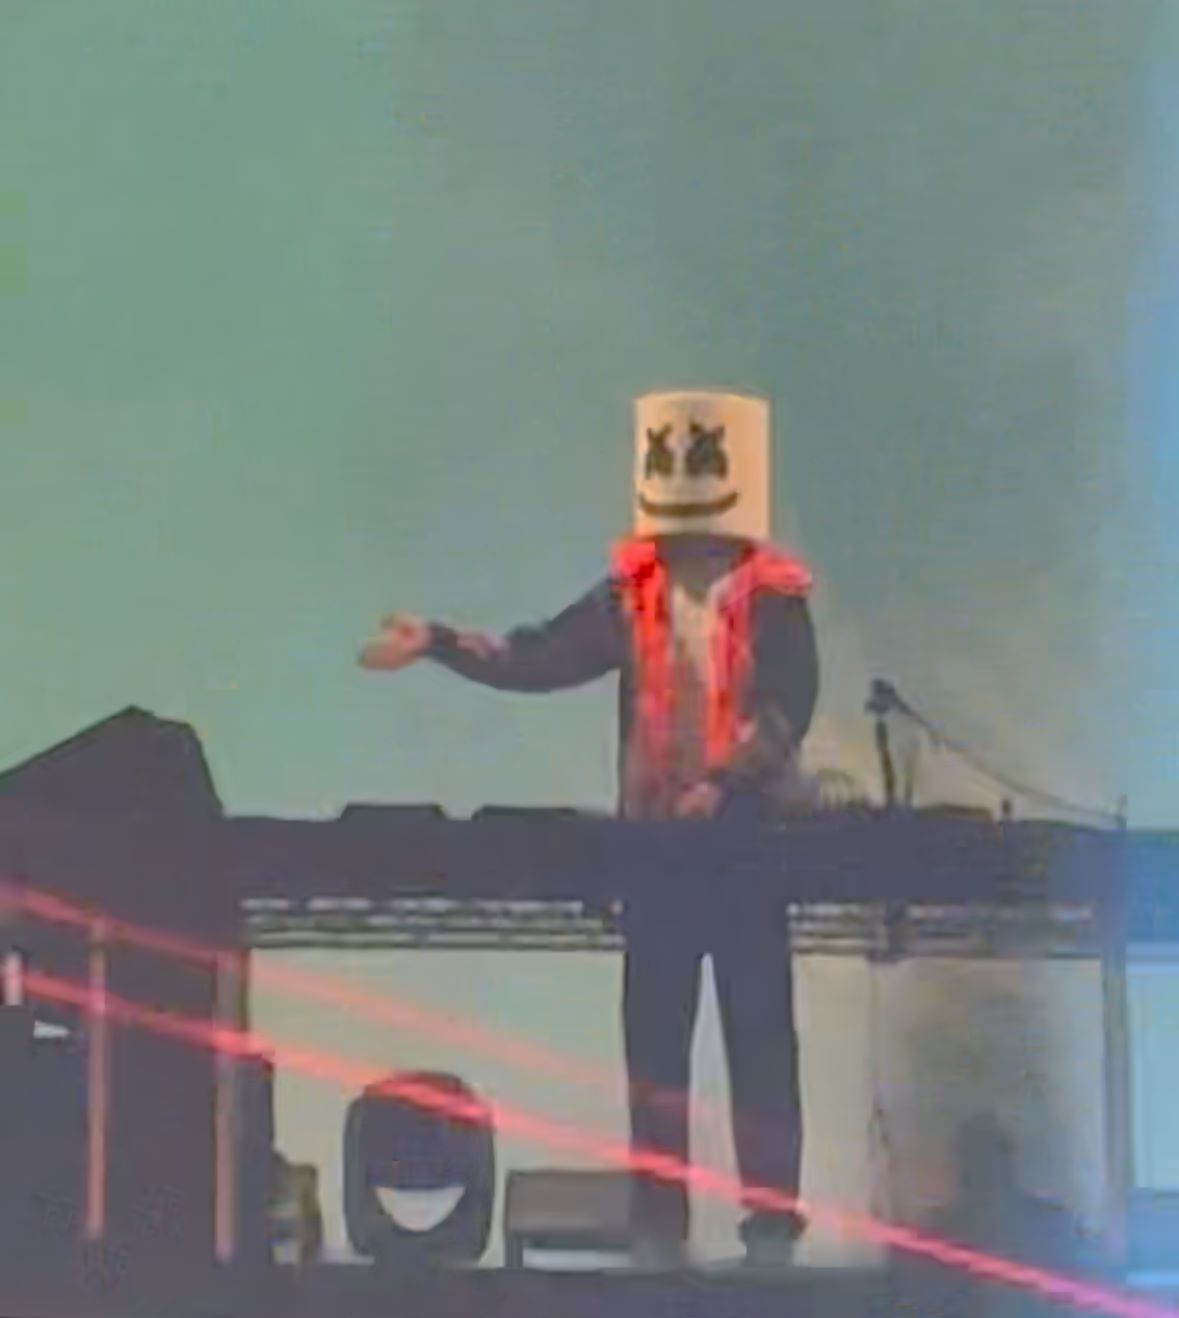 An image of Marshmello at a conceryt.